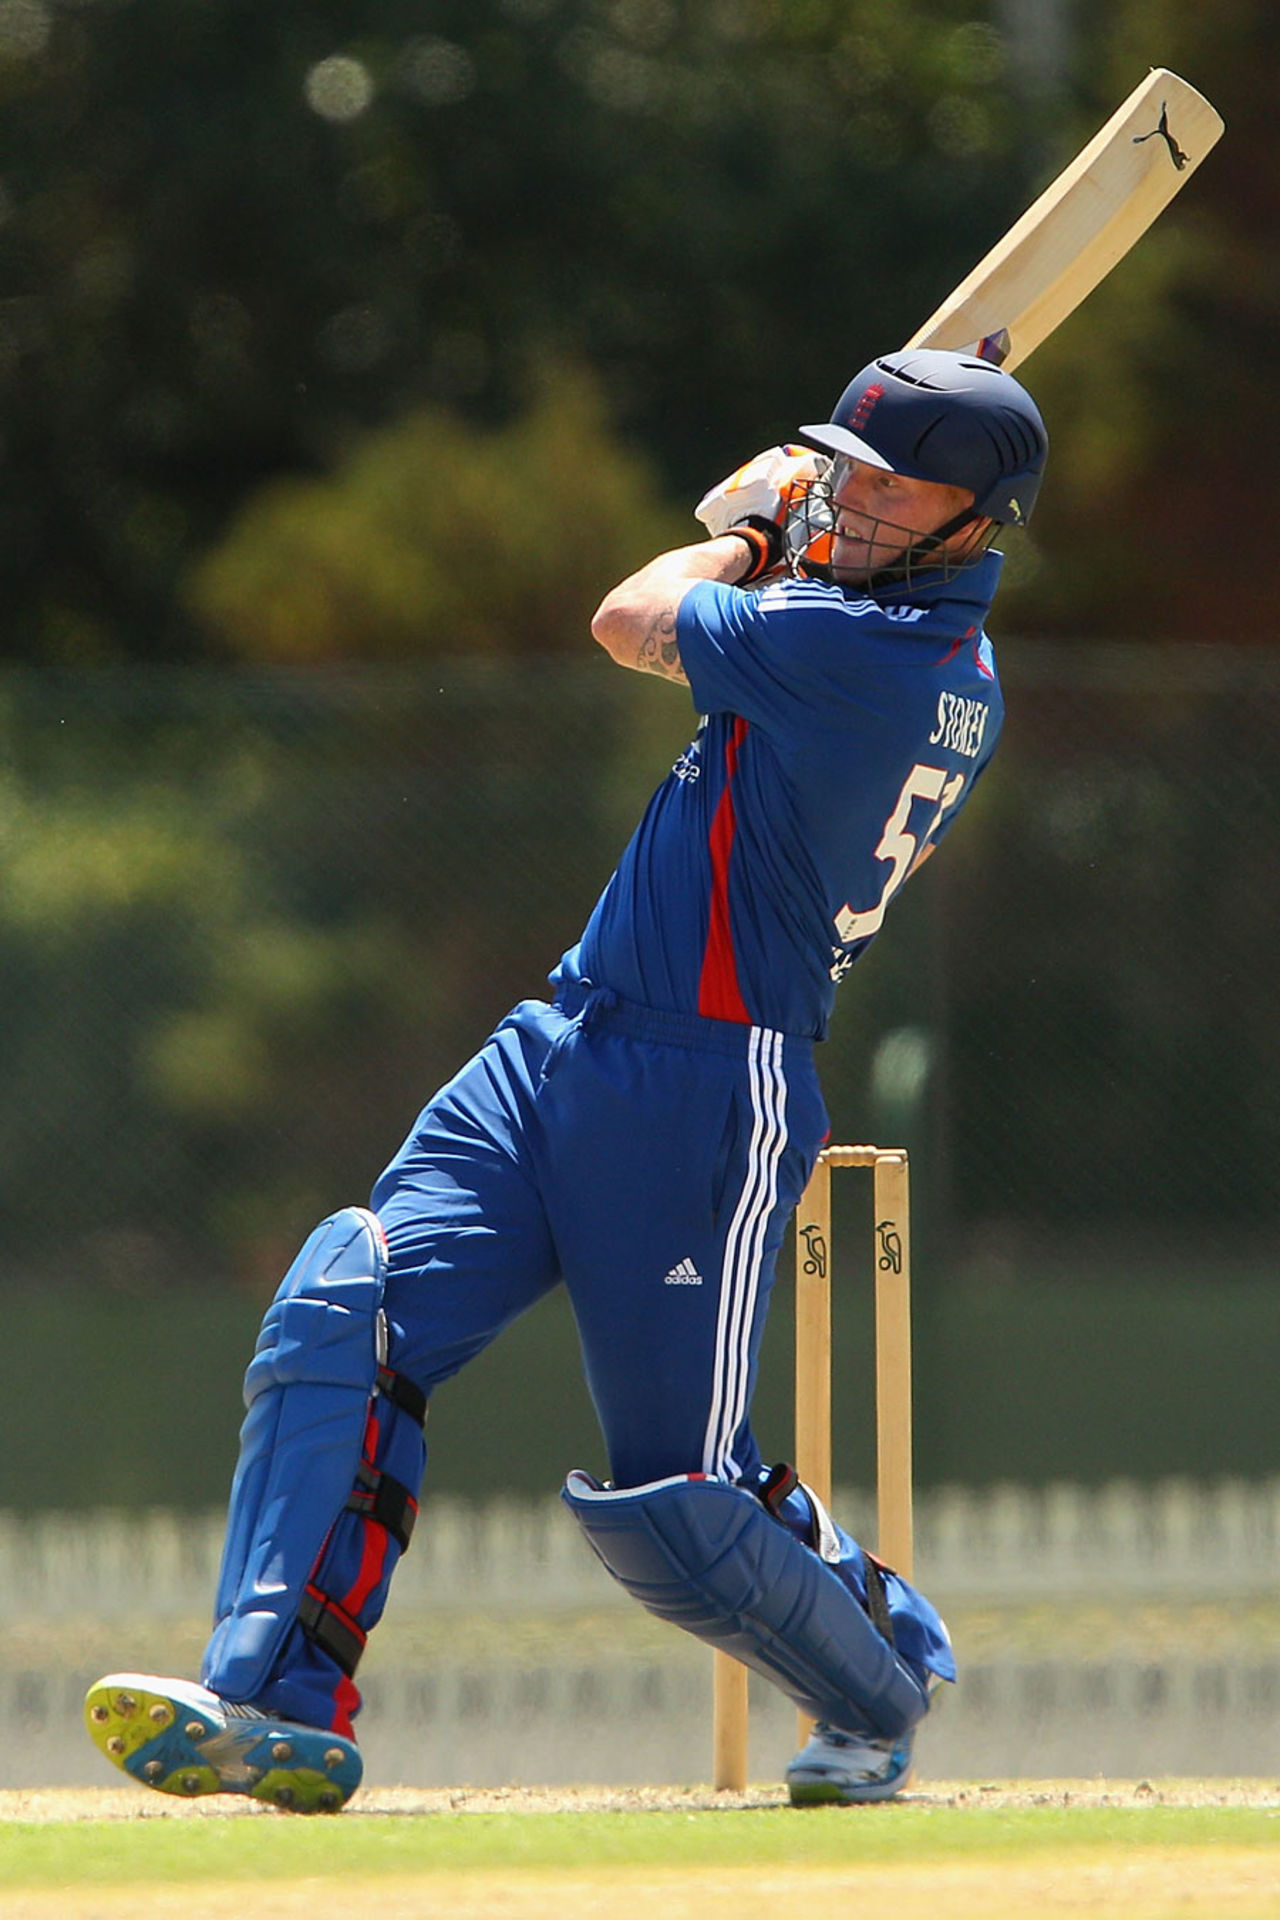 Ben Stokes launches one through the leg side, Victorian XI v England Lions, Tour match, Melbourne, February 11, 2013